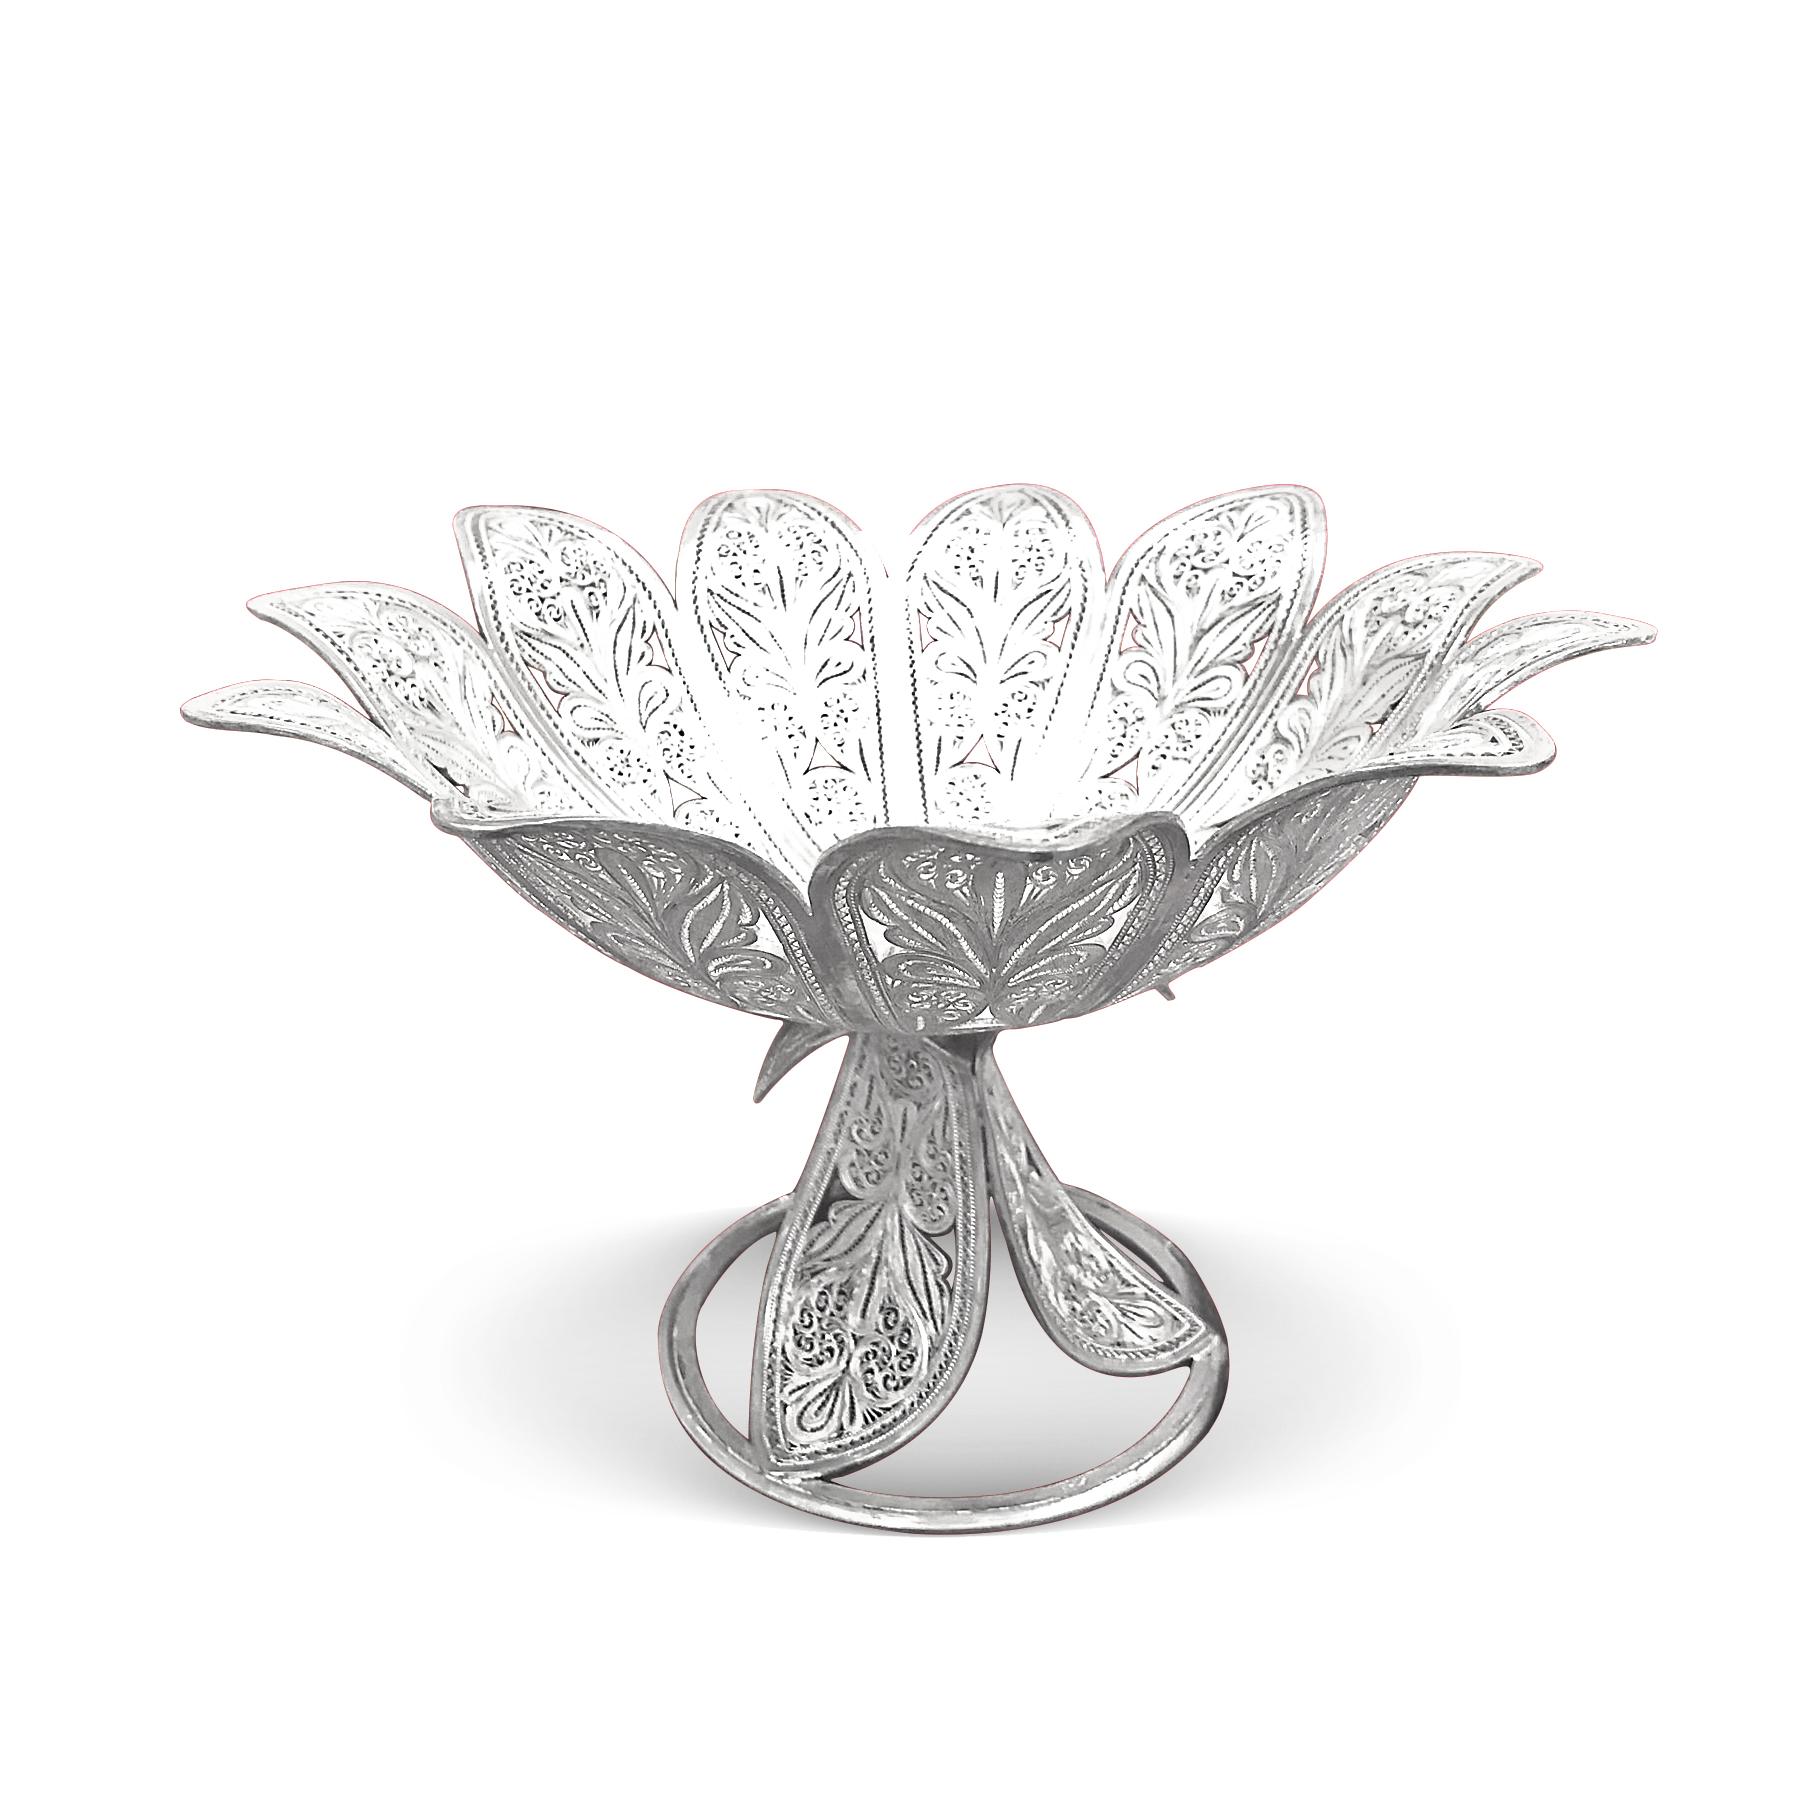 Ever imagined possessing a silver bowl delicate, beautifully designed and strong for in-house purposes and aesthetic purposes.This Filigree silver piece was carefully hand carved by the best craftsmen in Zanjan, Iran, one of the best places to make